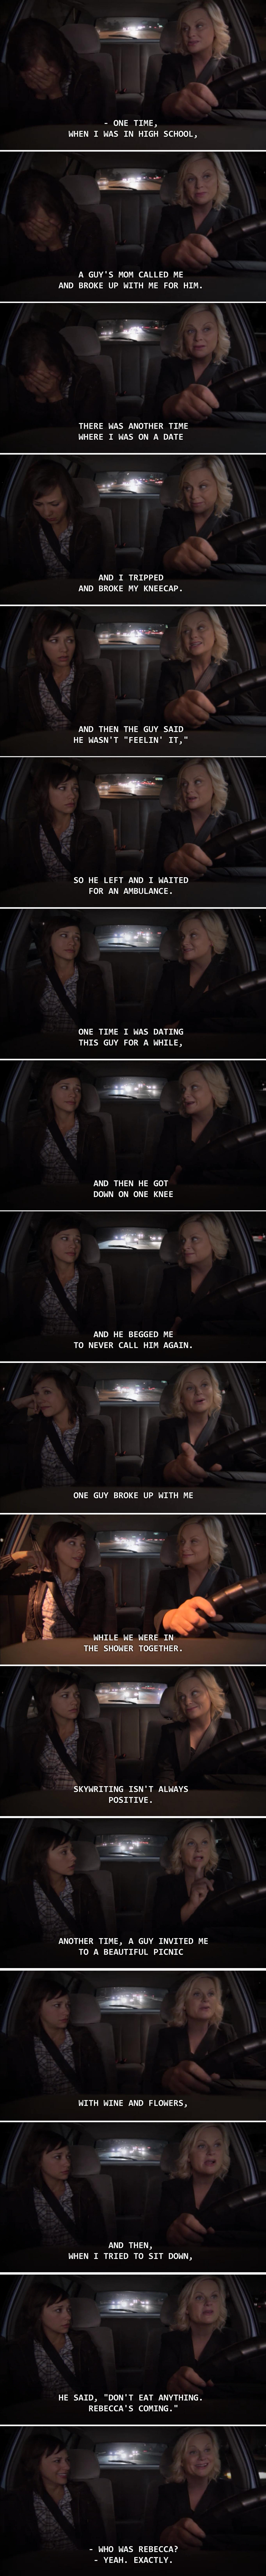 one time..., and then, breaking up, lol, fail, amy poehler 